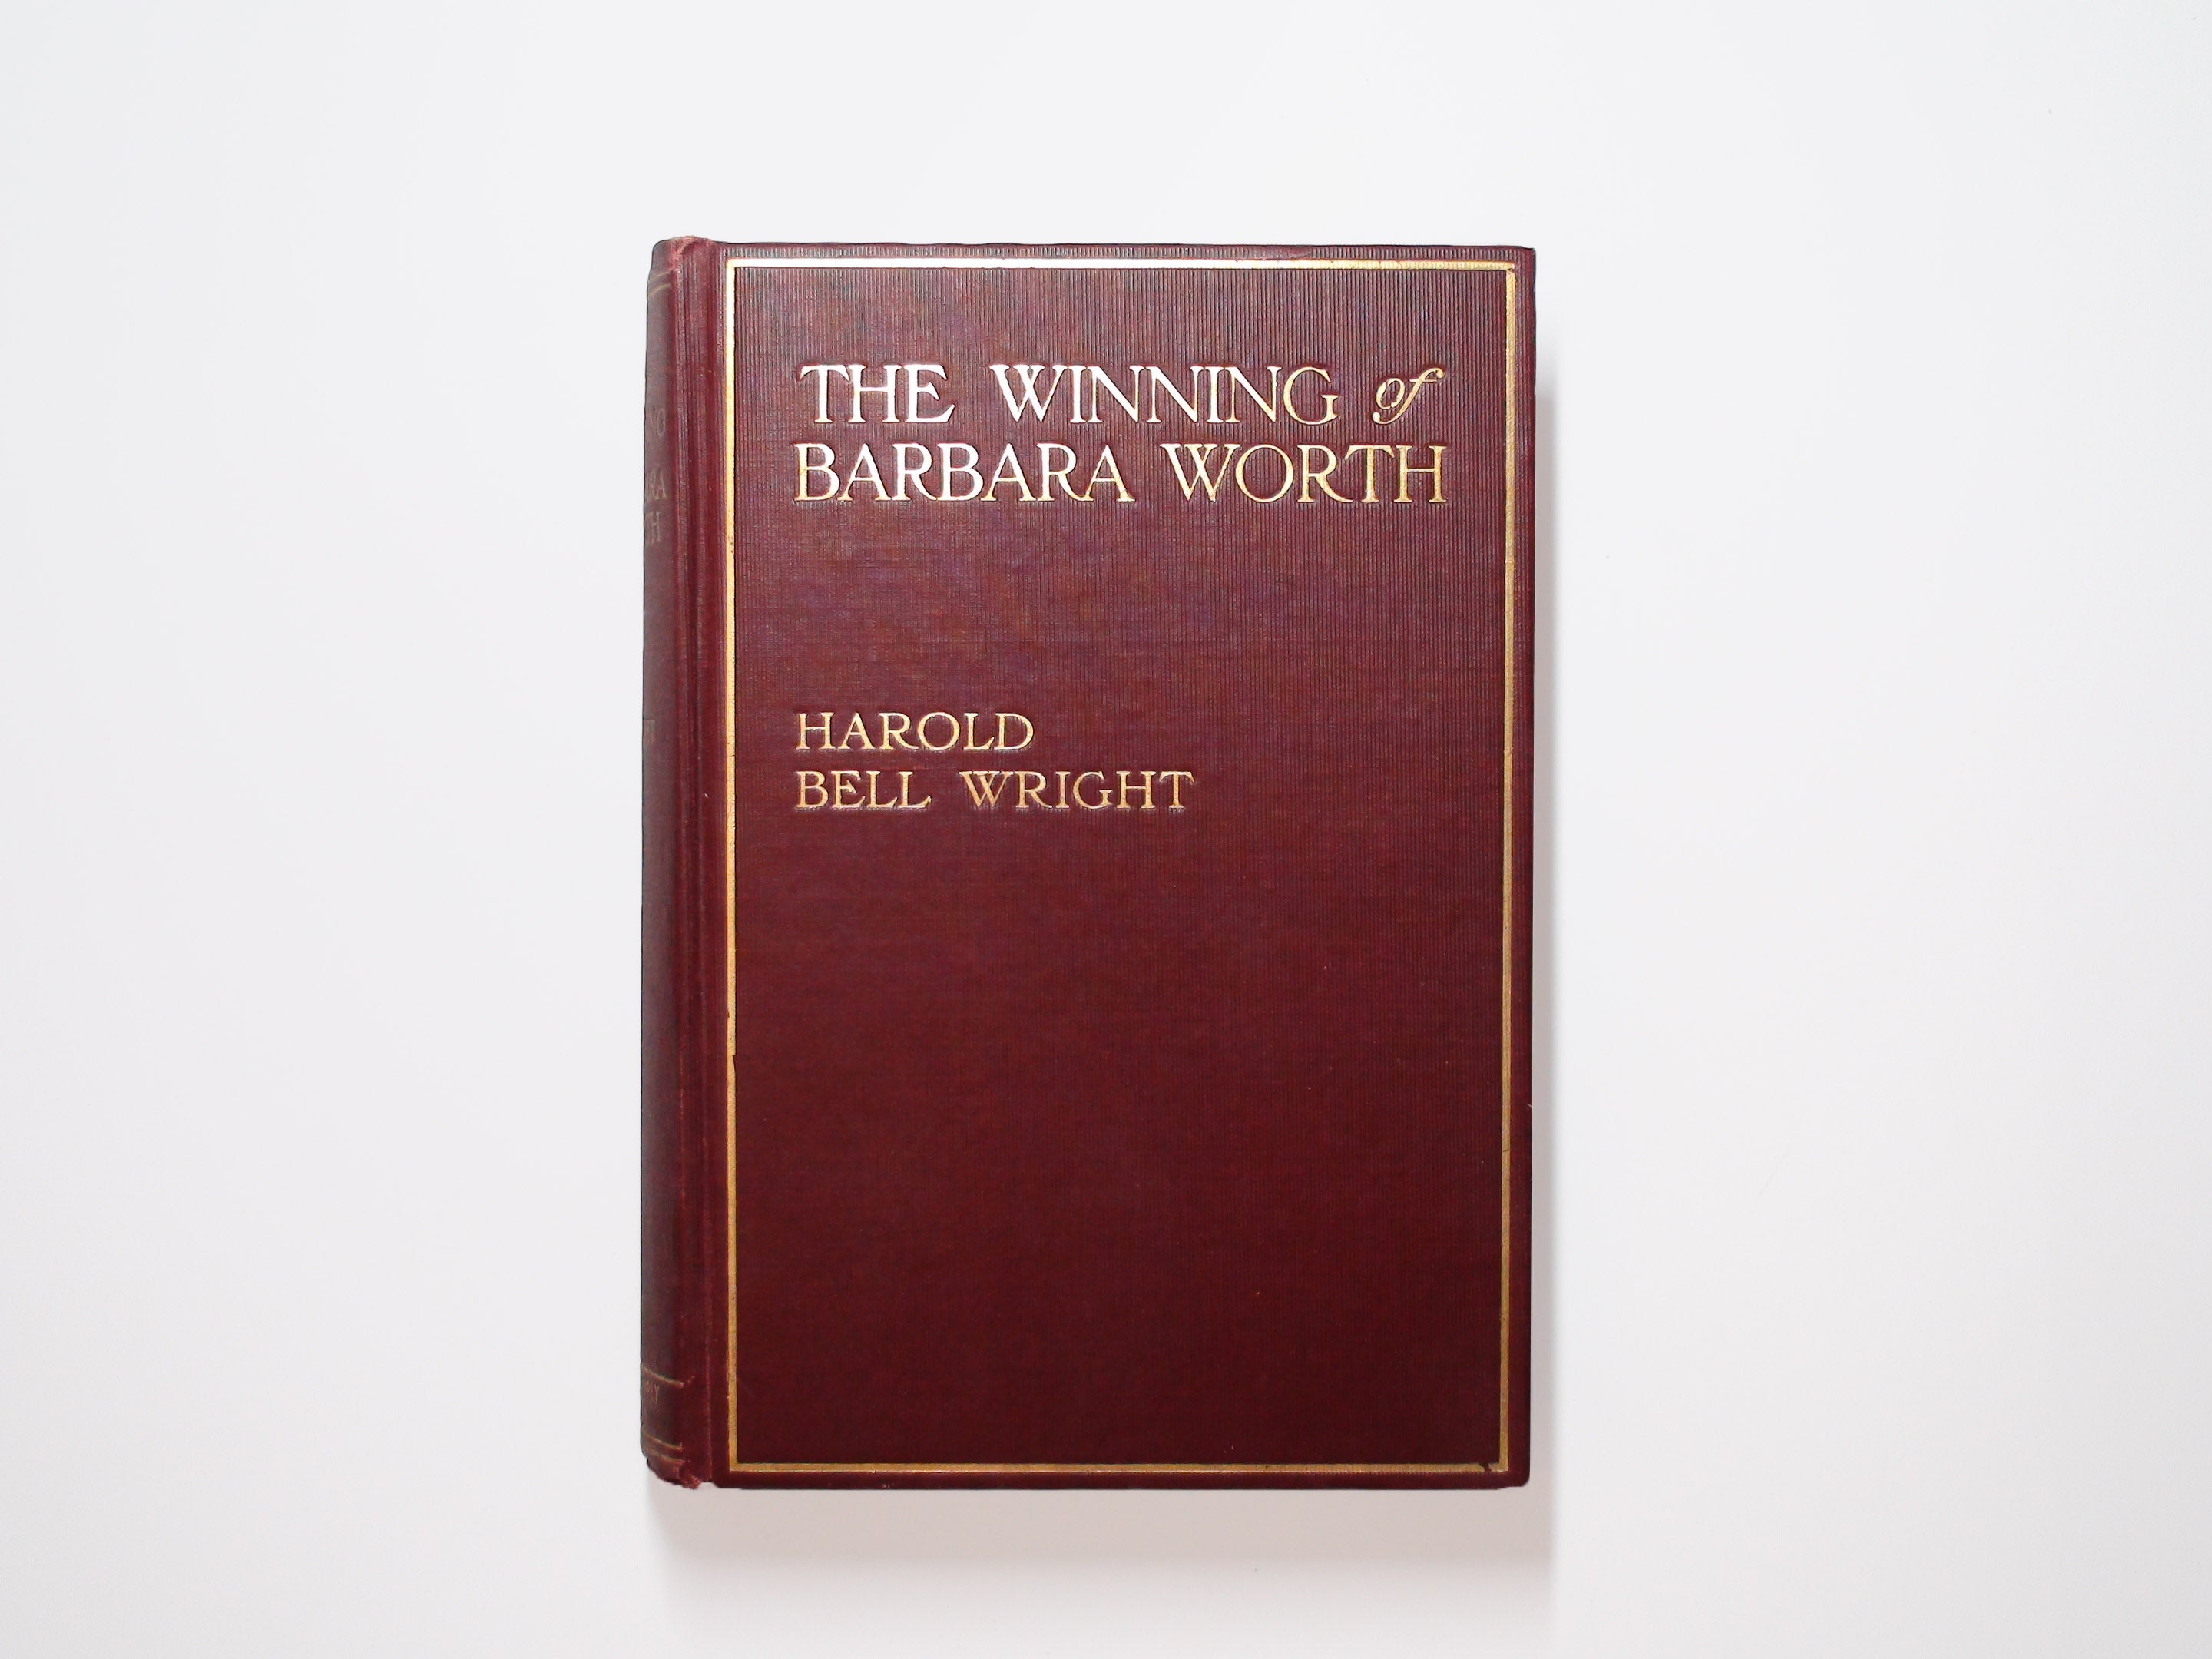 The Winning of Barbara Worth, by Harold Bell Wright, Illustrated by F. Graham Cootes, 1911